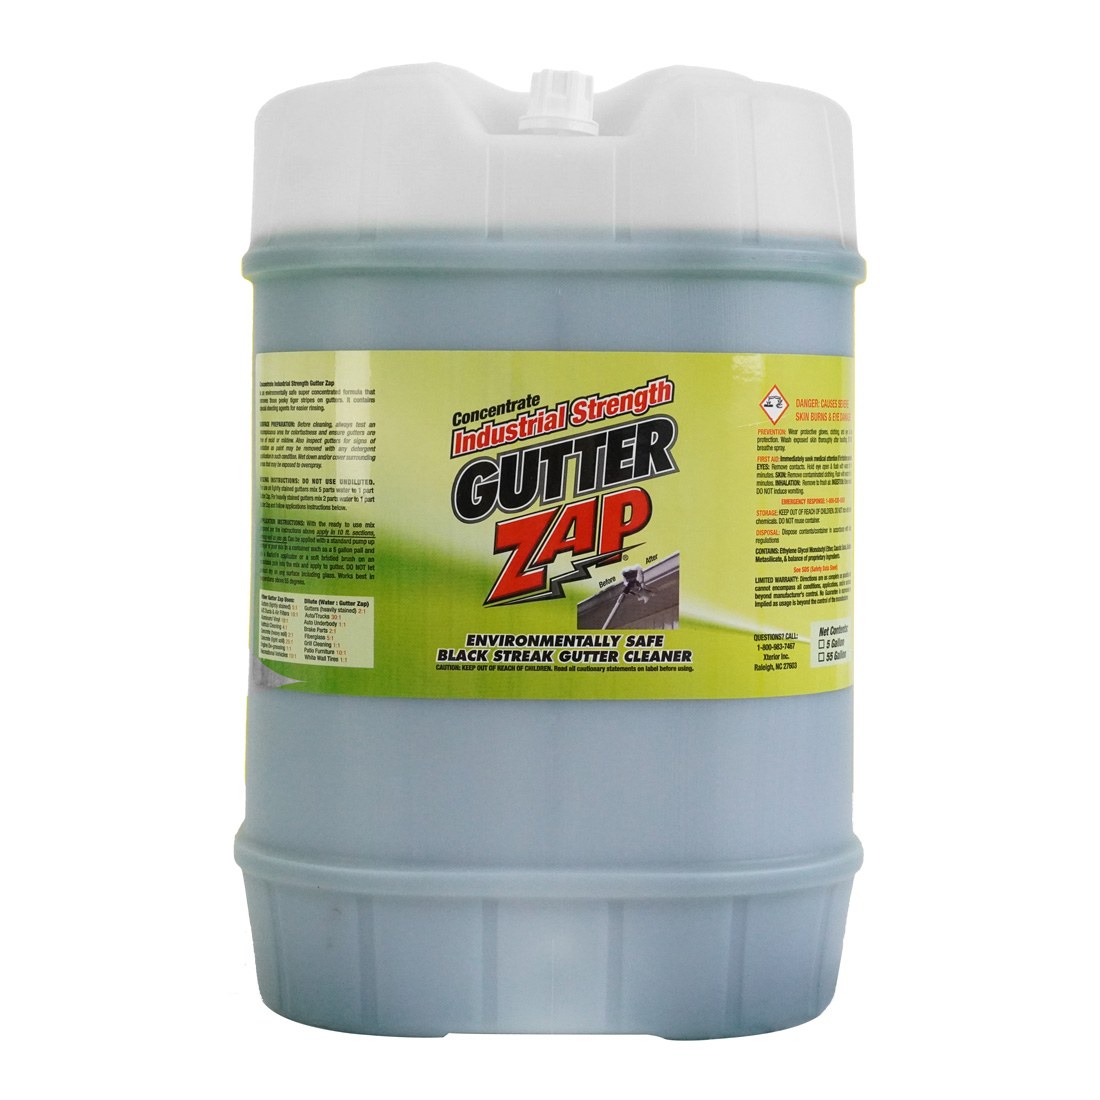 Gutter Zap Gutter Stain Remover Window Cleaning Solutions WCR – 